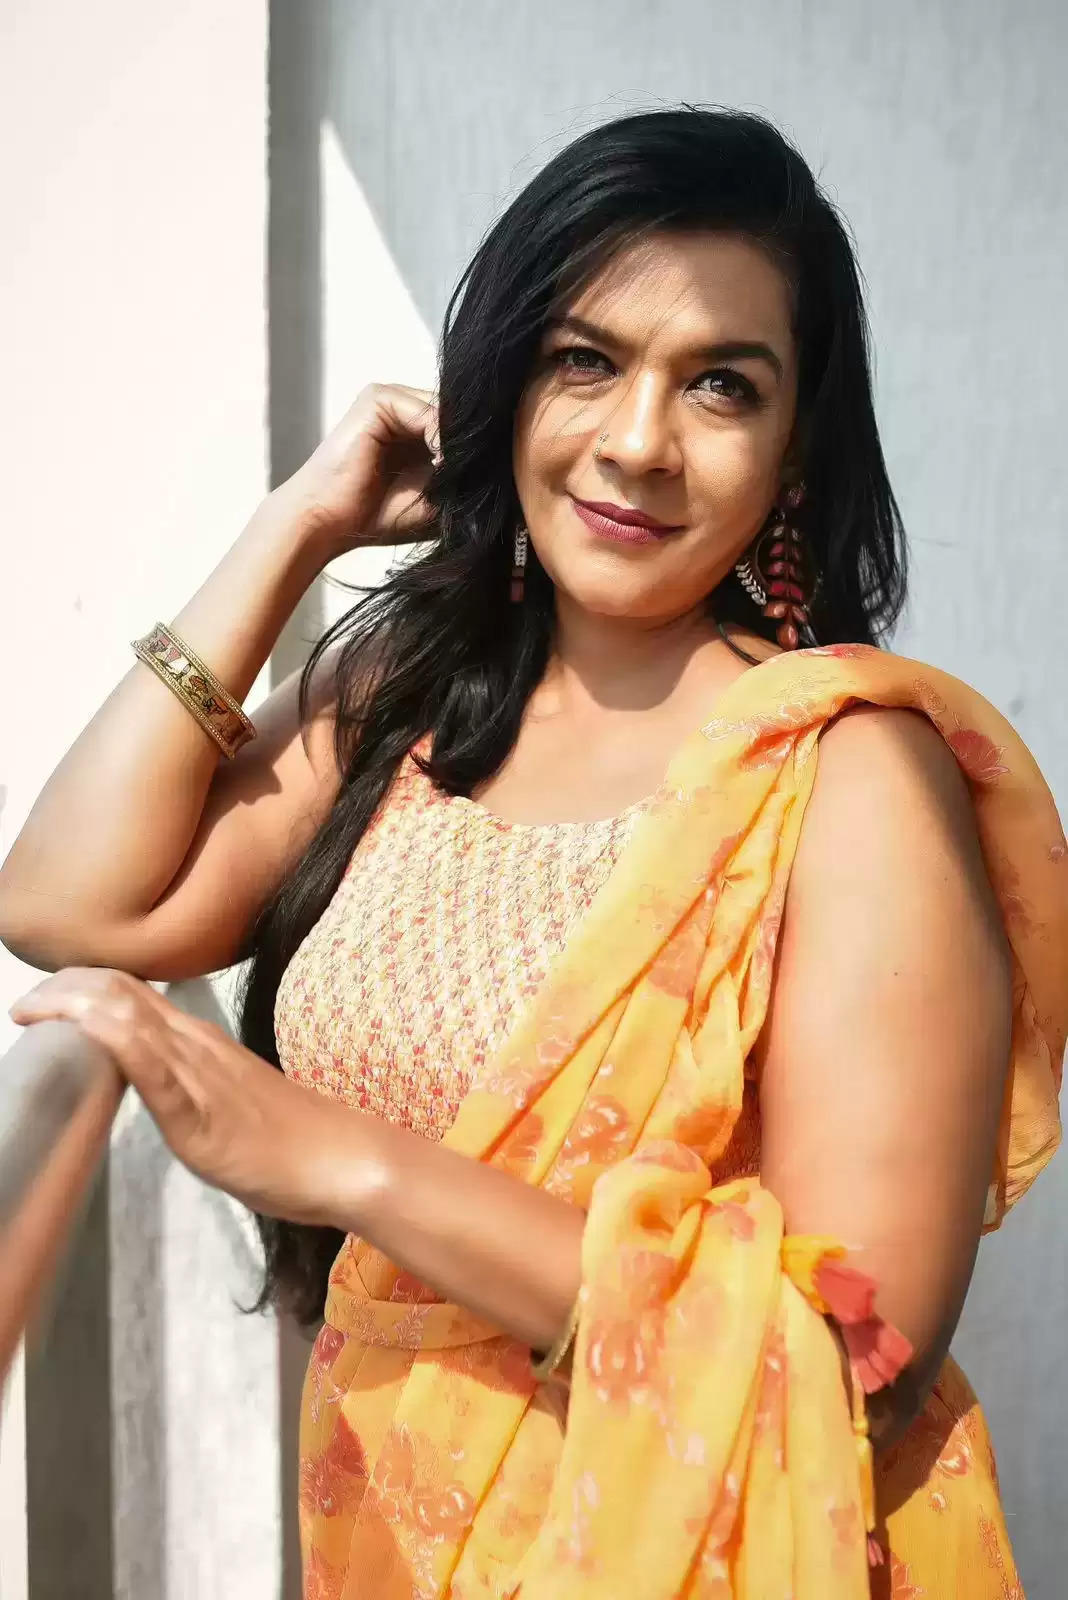 Love and relationships seem to be out of the window: Namita Lal